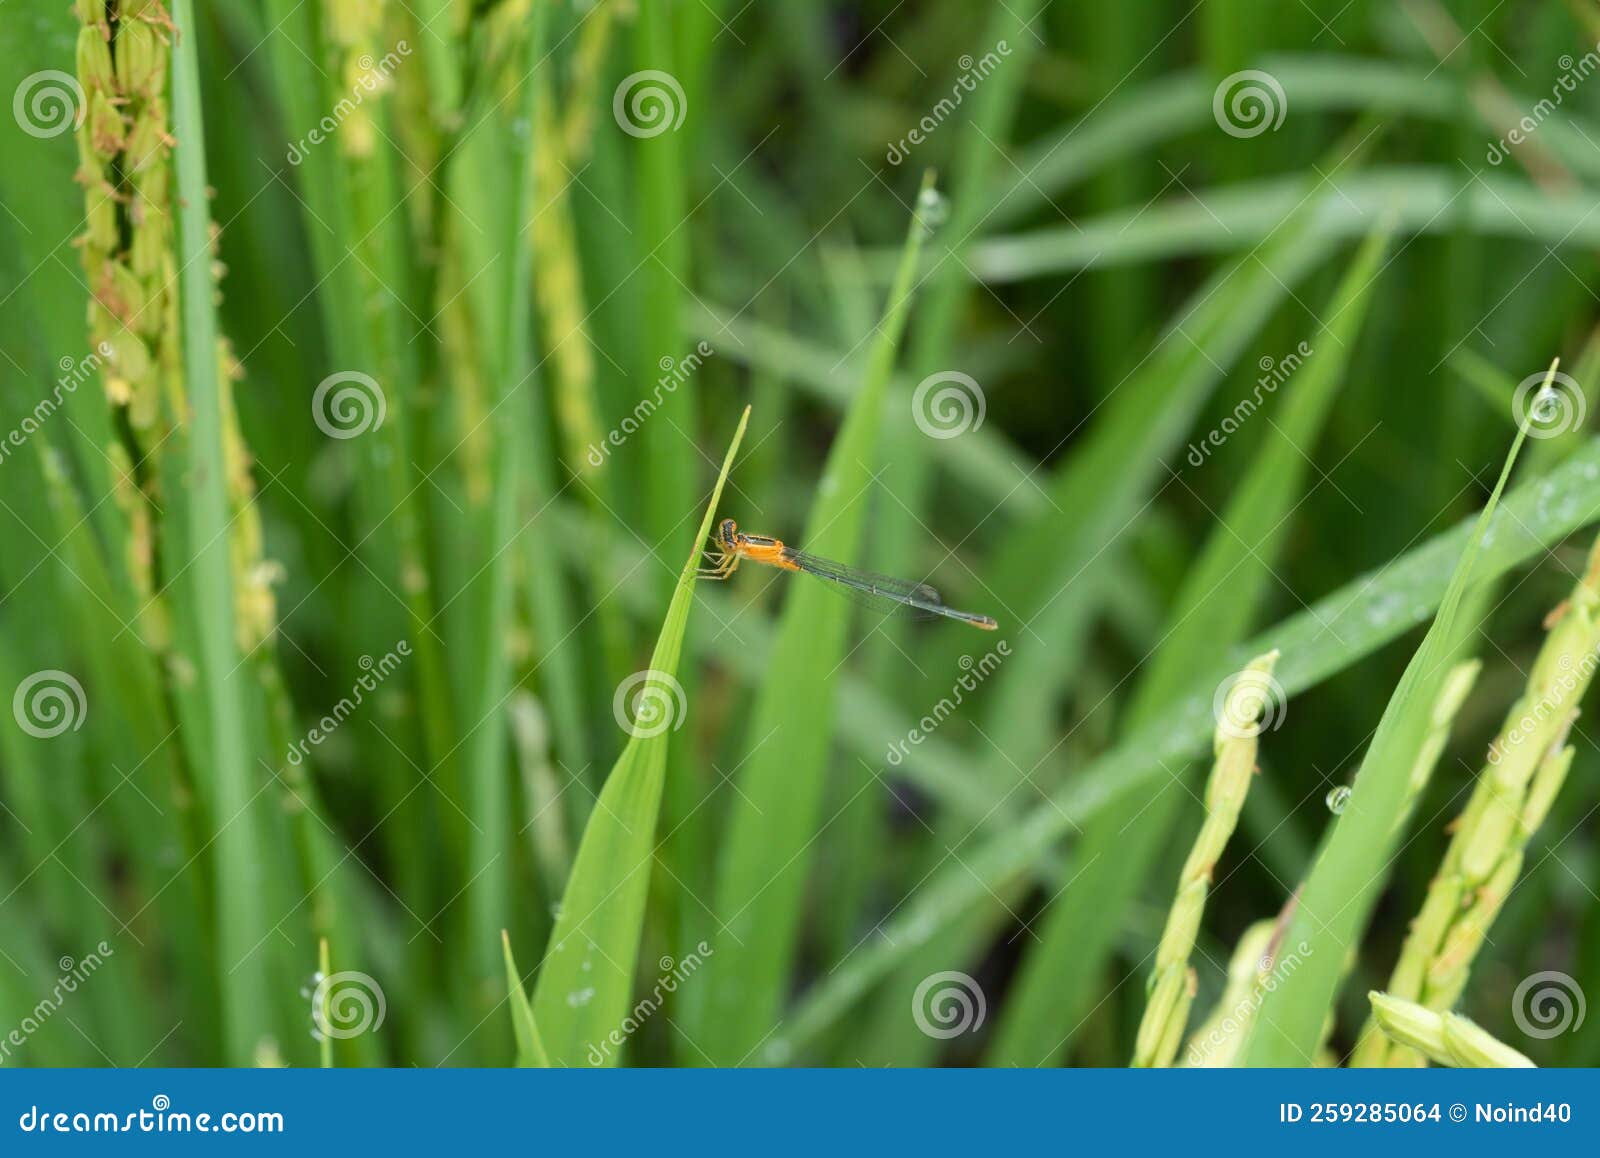 dragonfly agriocnemis pygmaea in rice field